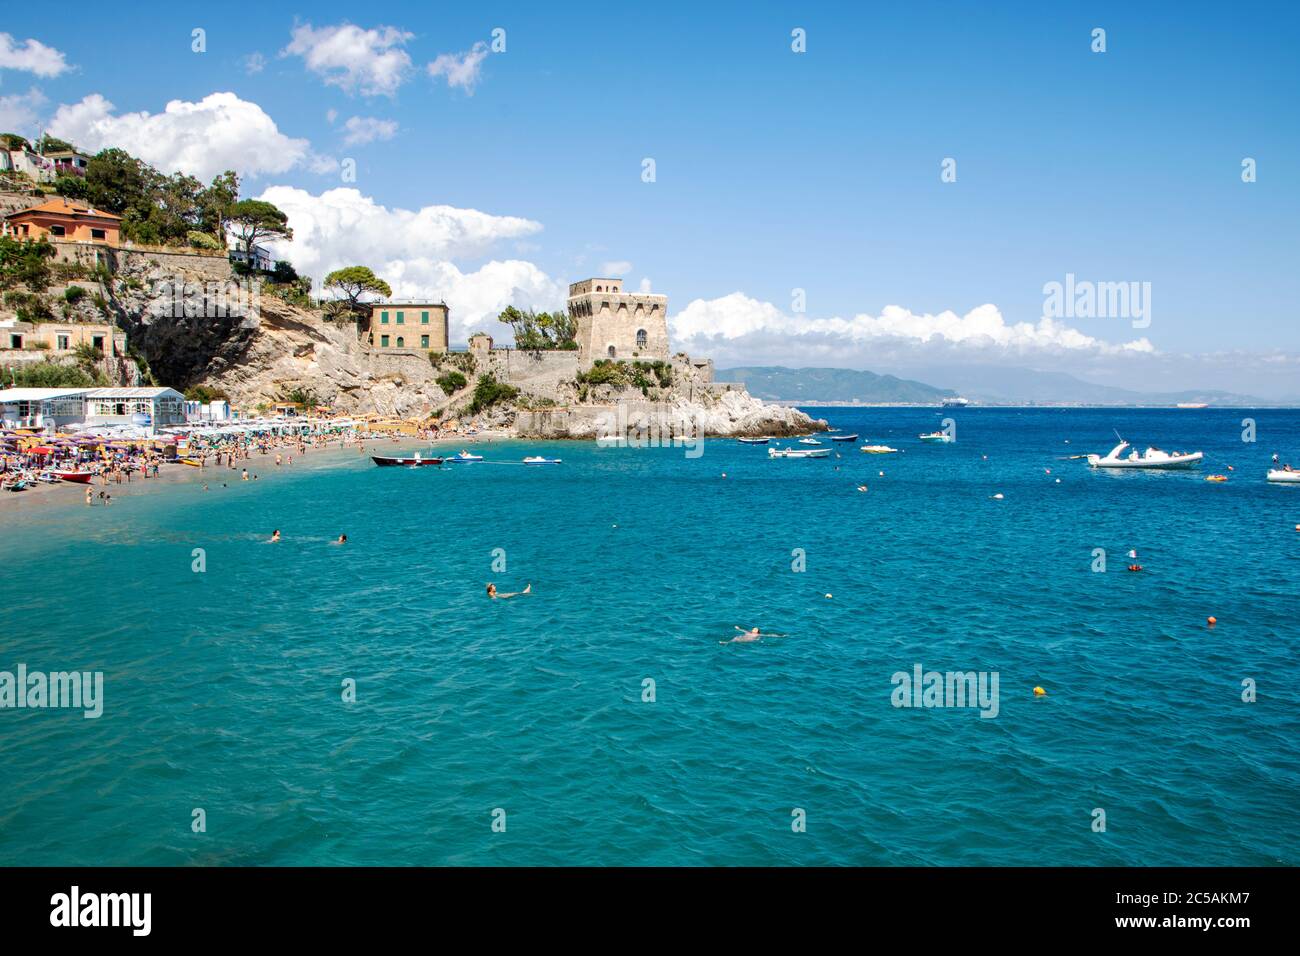 At Erchie - Italy - On june 2020 - Bay and beach of Erchie on Amalfi coast, Italy Stock Photo